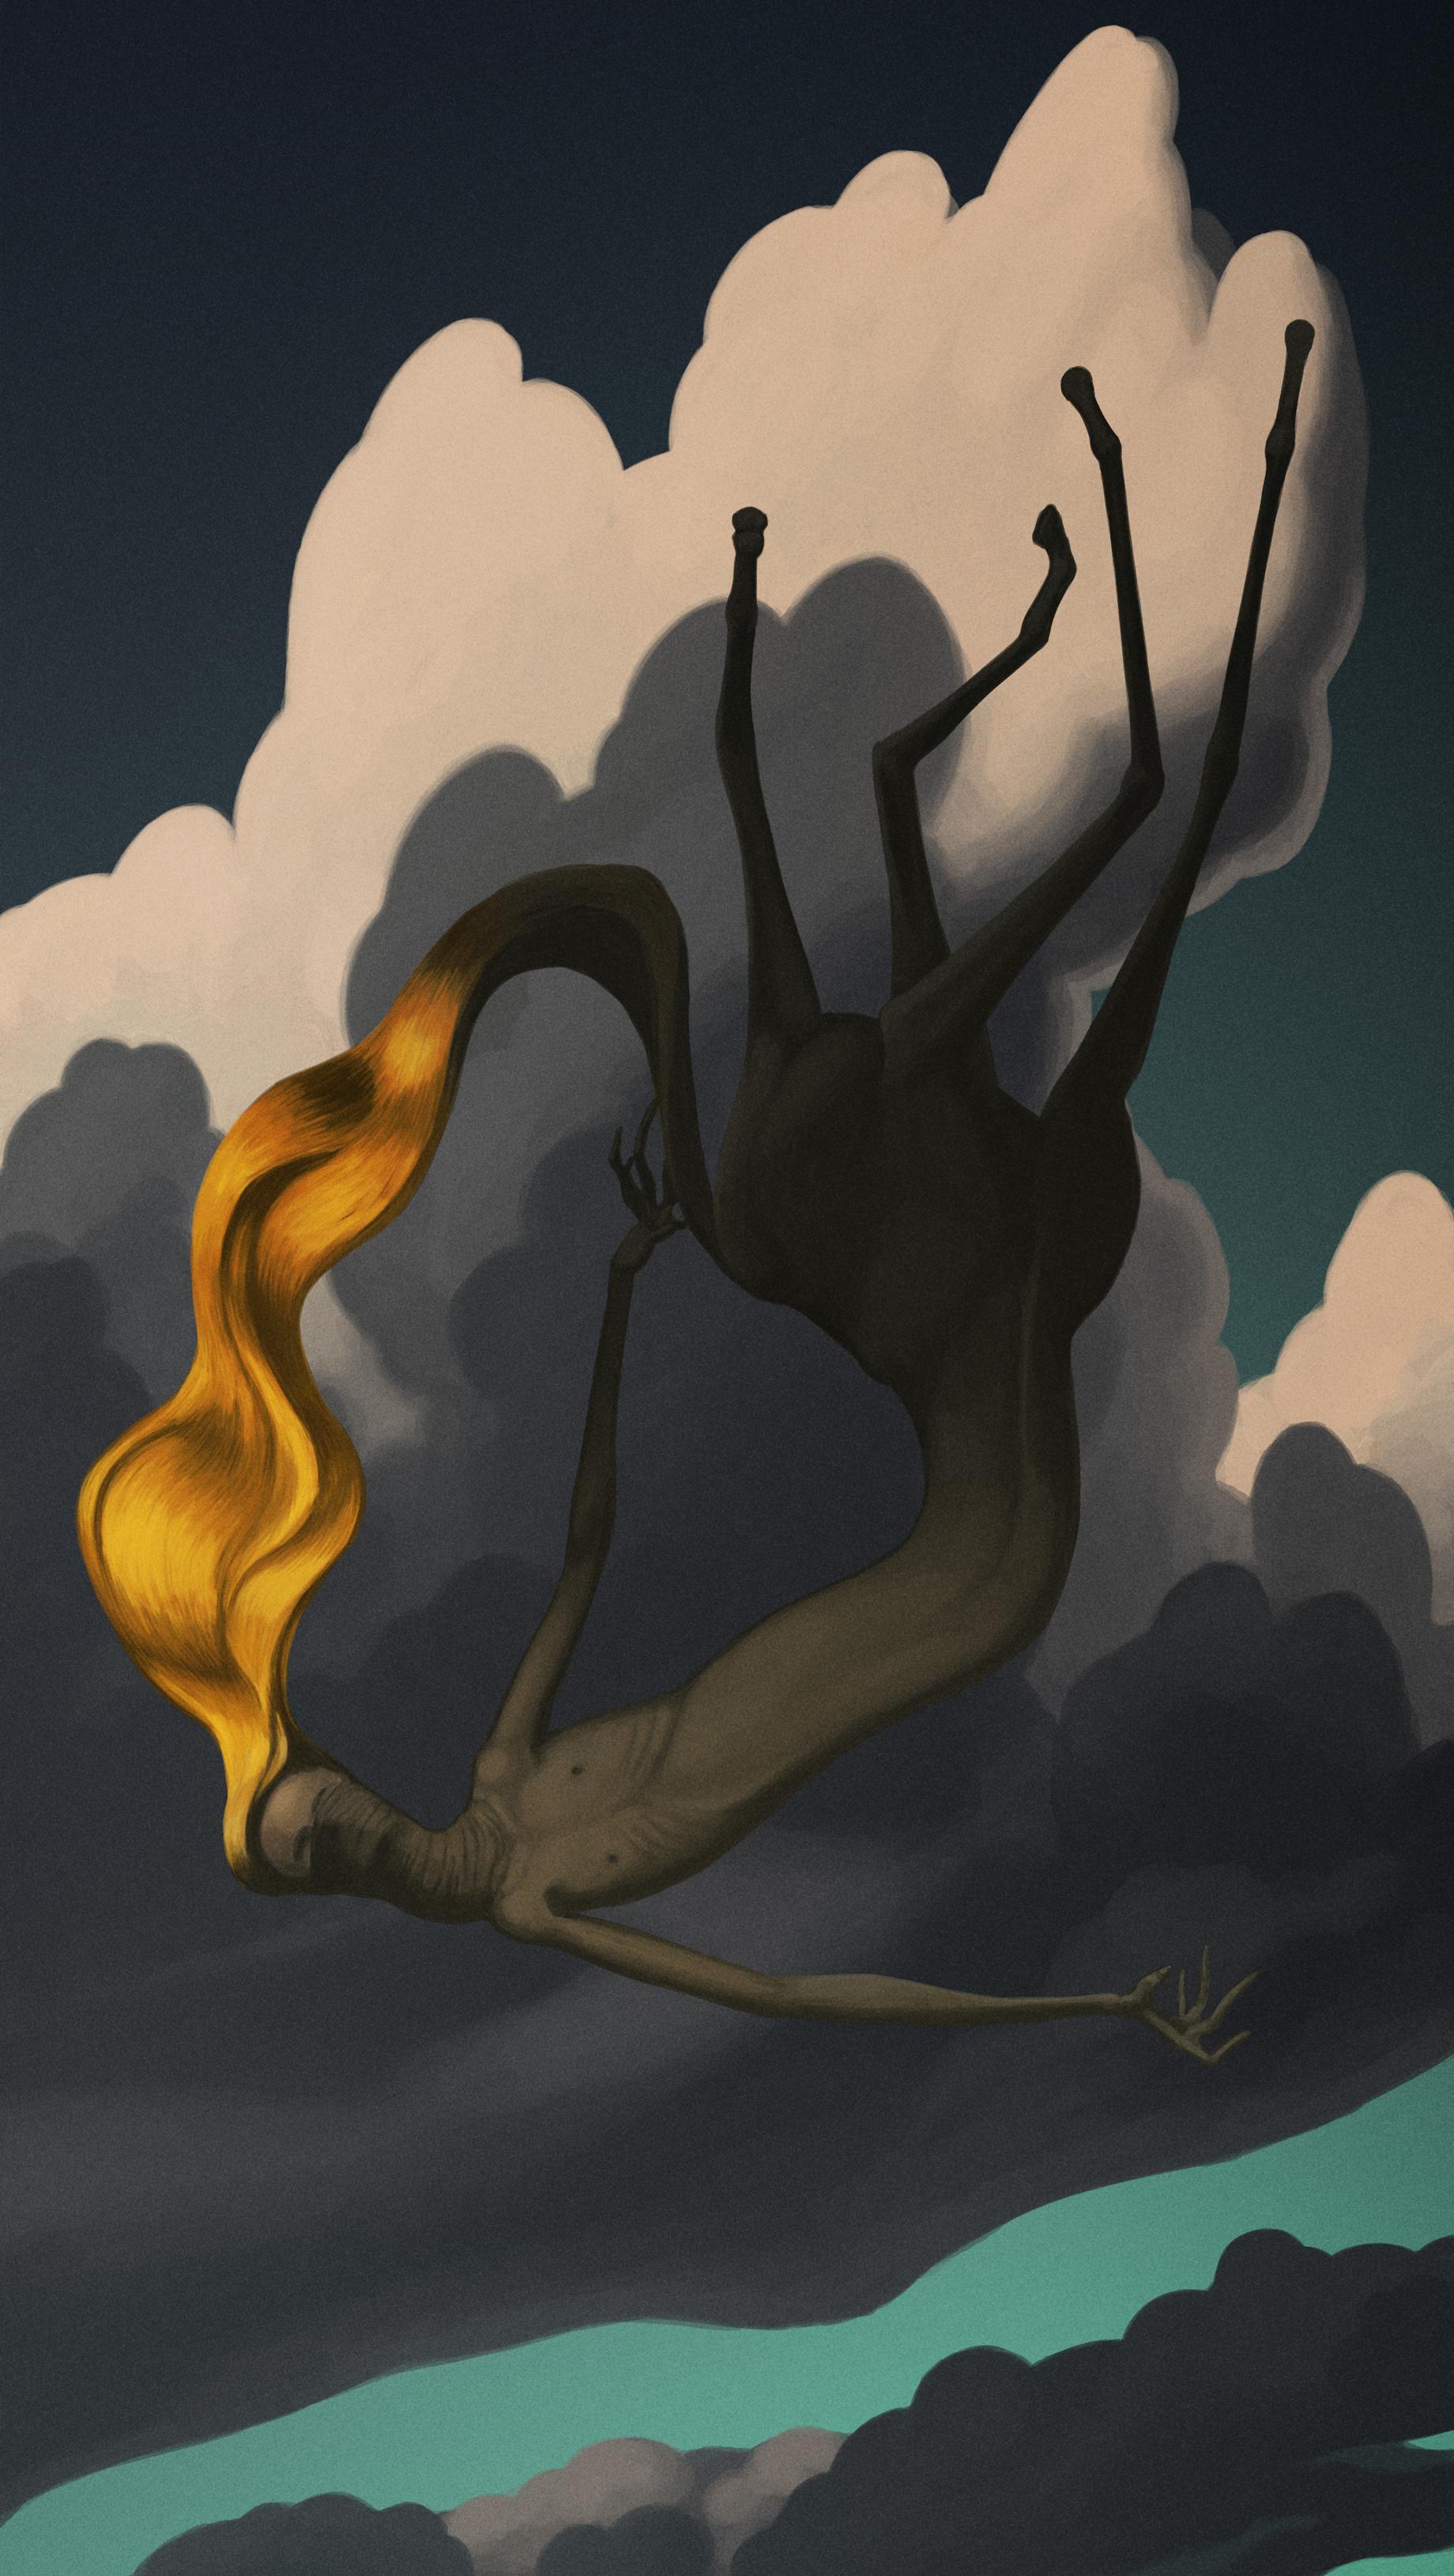 A striking and evocative image showing a figure in a state of freefall against a backdrop of billowing white clouds and a dark blue sky. The figure is silhouetted and appears almost featureless, with a flowing mane of bright, fiery orange hair that stands in stark contrast to its shadowy form. The figure's limbs are splayed out in a dramatic display, with the hands and fingers elongated, accentuating the feeling of motion and descent. The overall composition evokes a sense of dynamic movement and the interplay between light and dark, with the clouds below reflecting the sky's gradient from a soft teal to a deep navy.